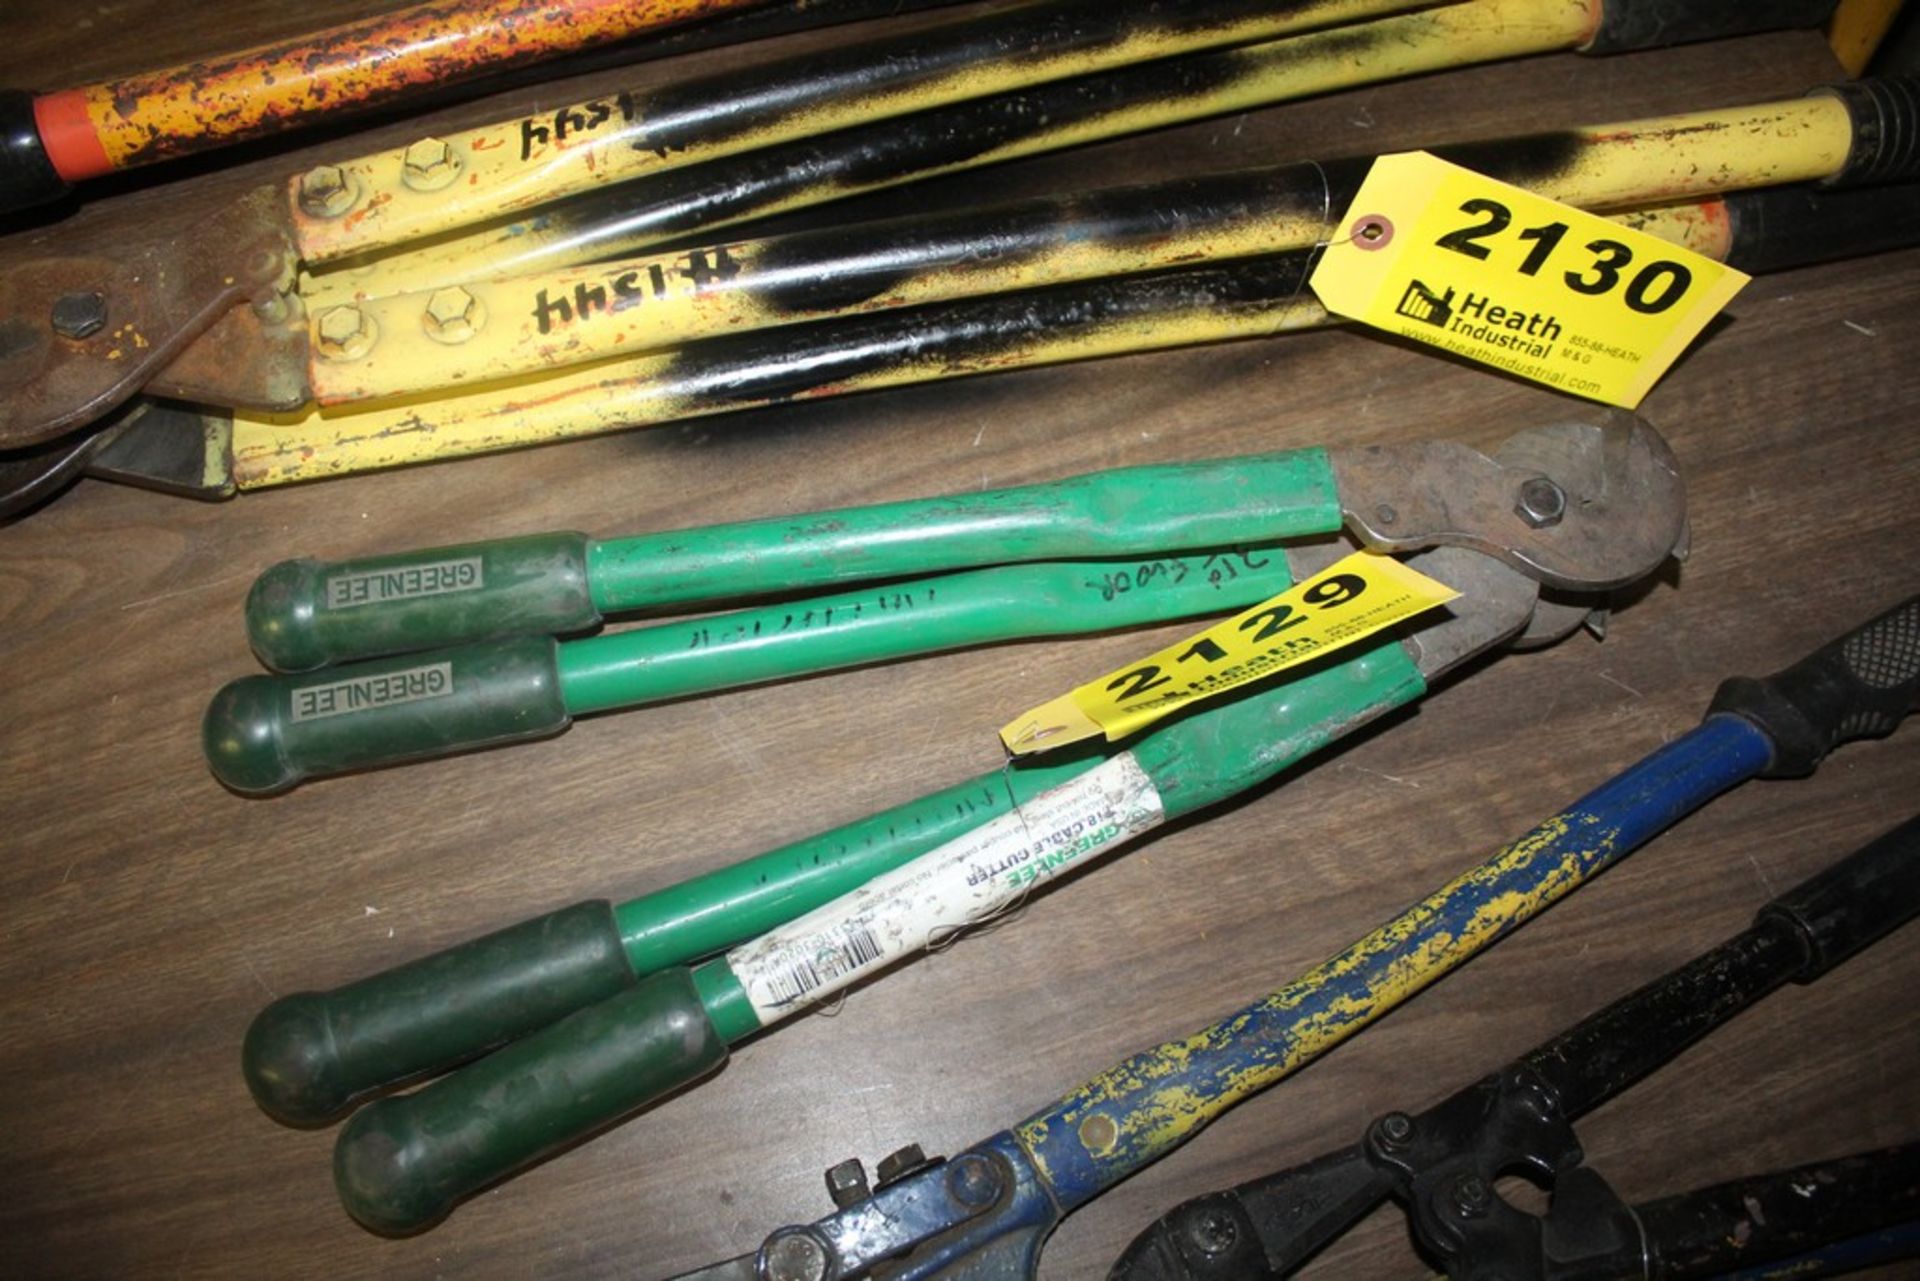 (2) GREENLEE CABLE CUTTERS